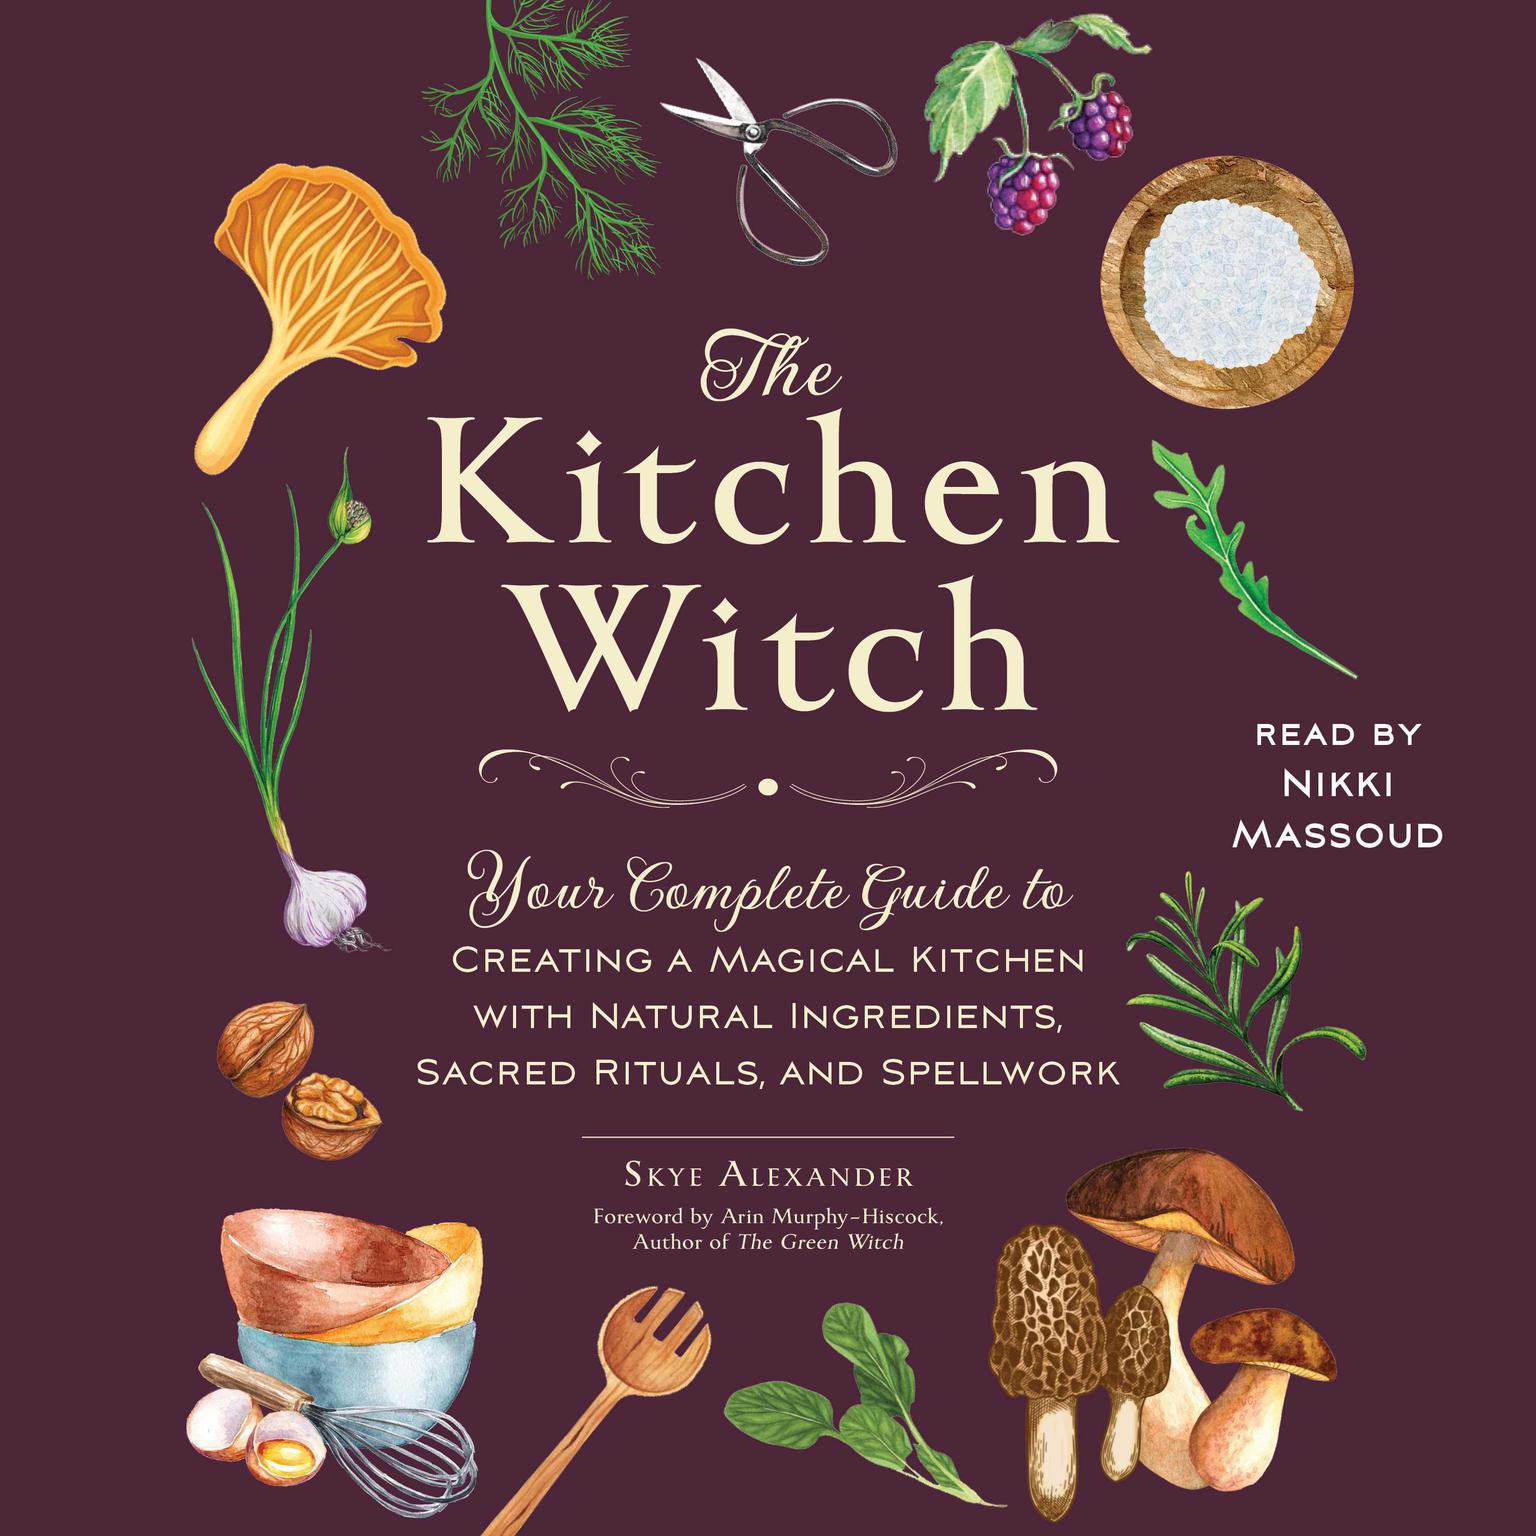 The Kitchen Witch: Your Complete Guide to Creating a Magical Kitchen with Natural Ingredients, Sacred Rituals, and Spellwork Audiobook, by Skye Alexander